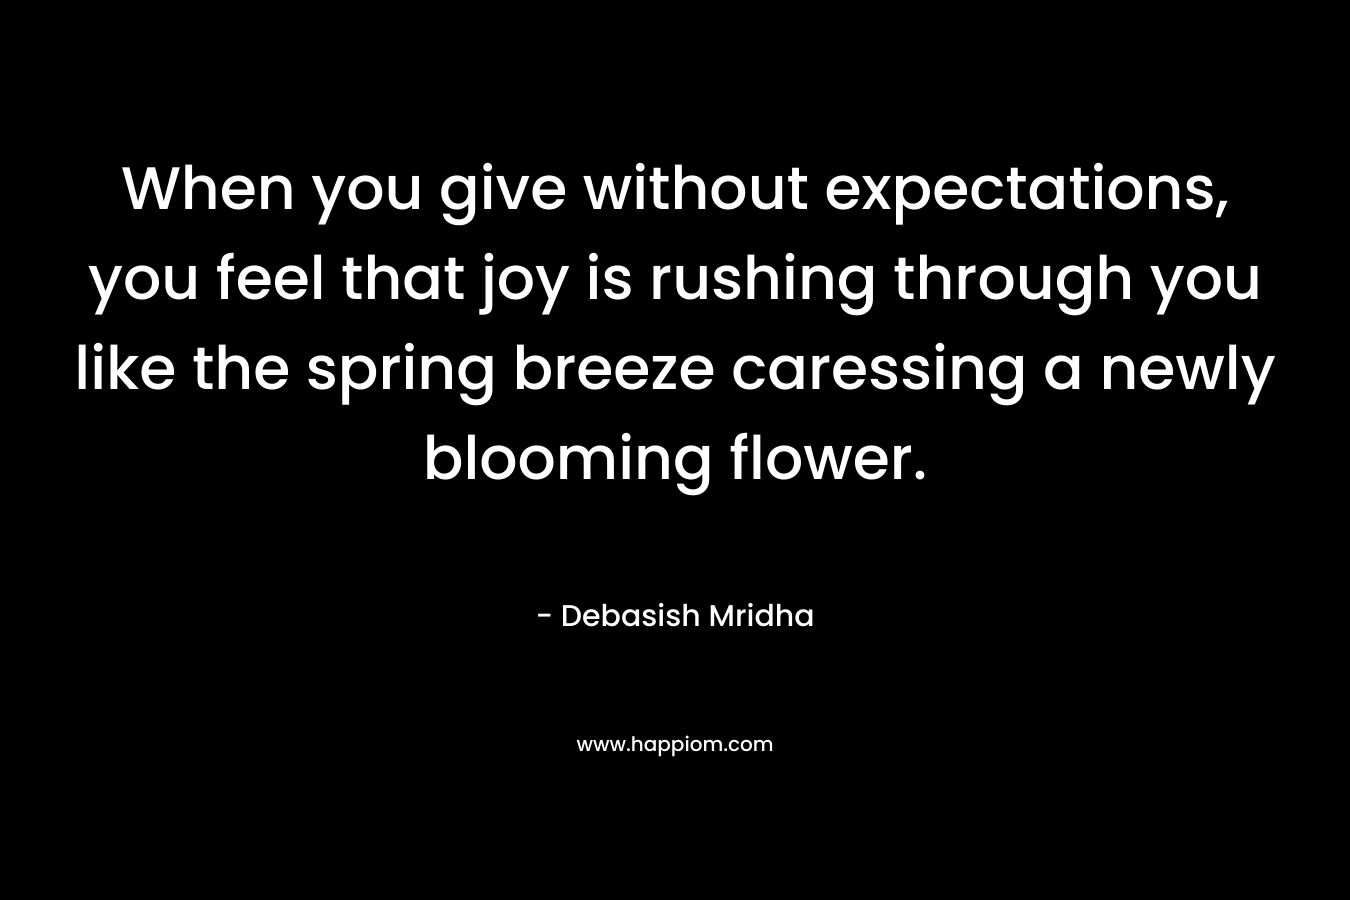 When you give without expectations, you feel that joy is rushing through you like the spring breeze caressing a newly blooming flower.